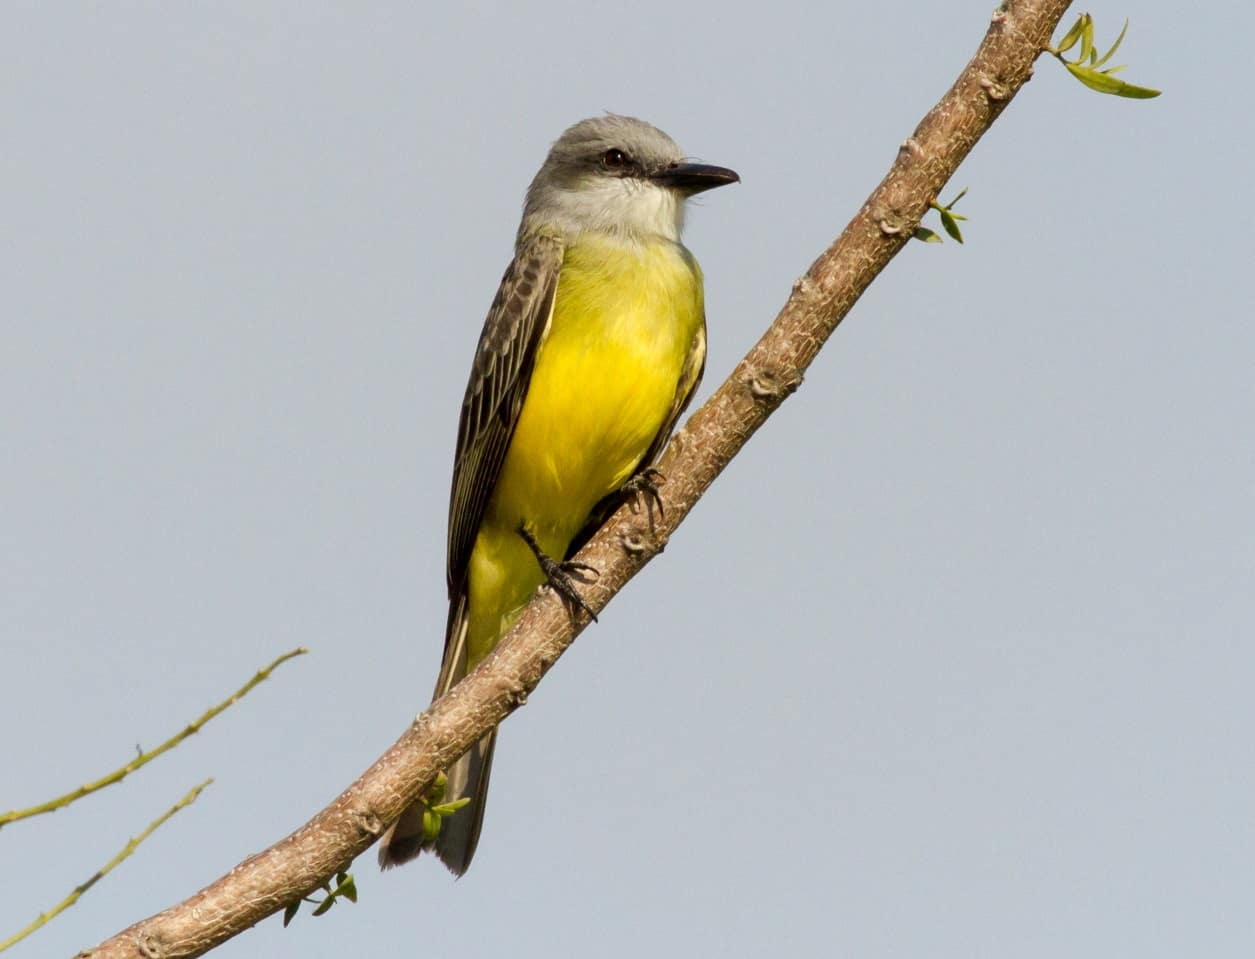 Tropical Kingbird perched on branch